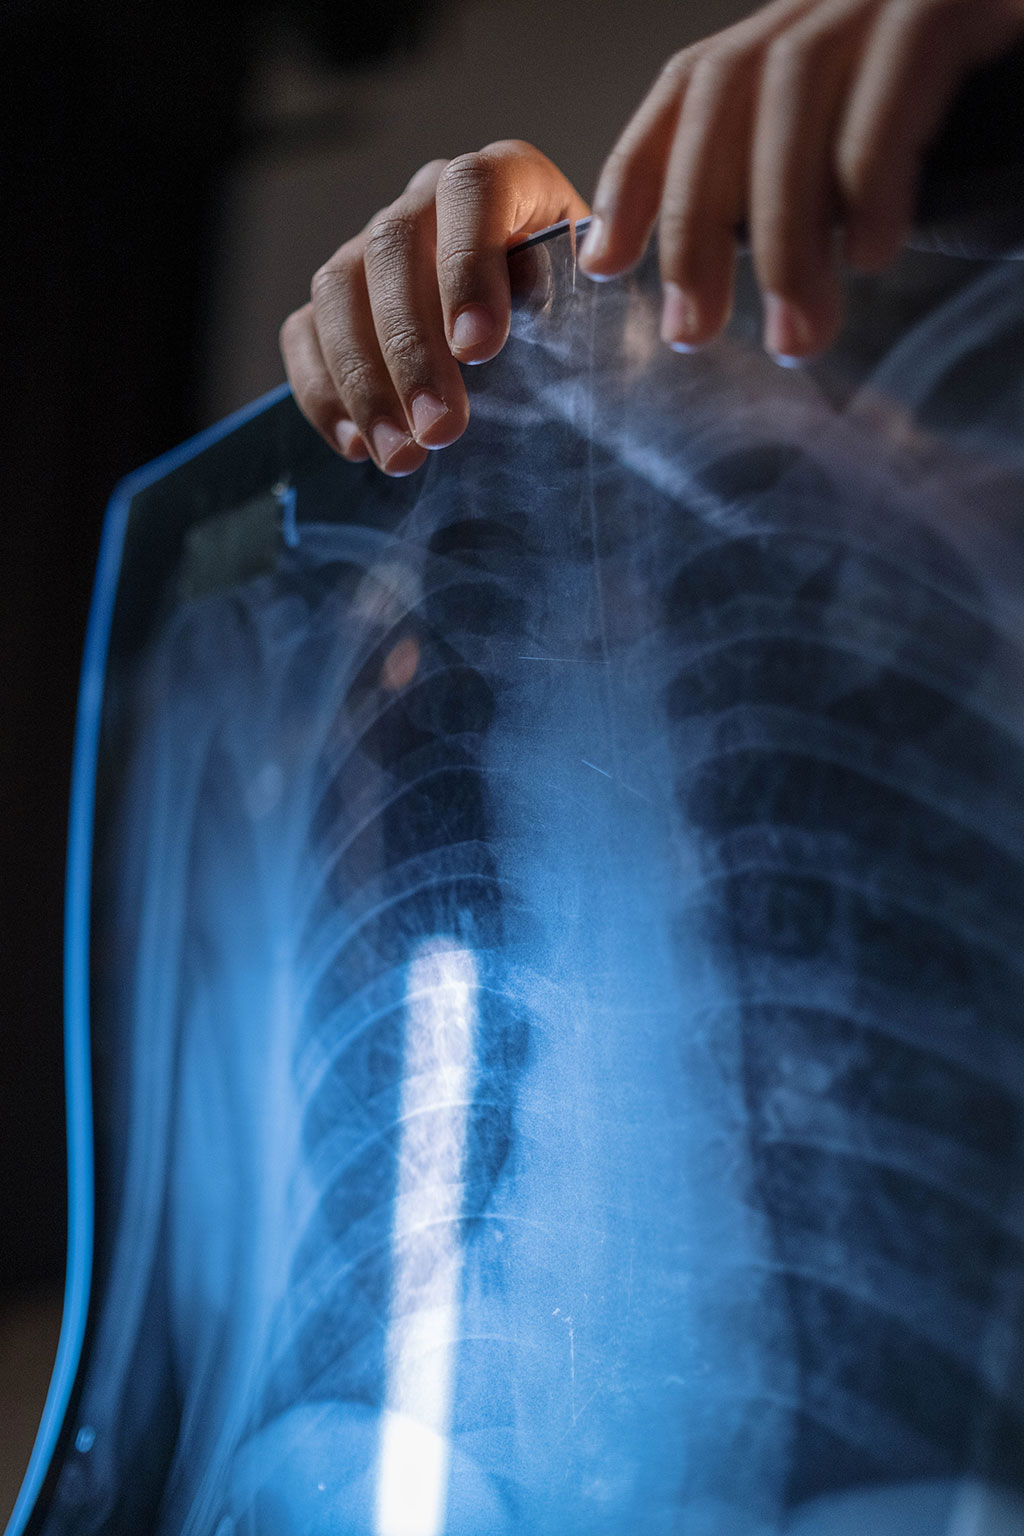 Image: An AI tool can accurately identify normal and abnormal chest X-rays in a clinical setting (Photo courtesy of Pexels)